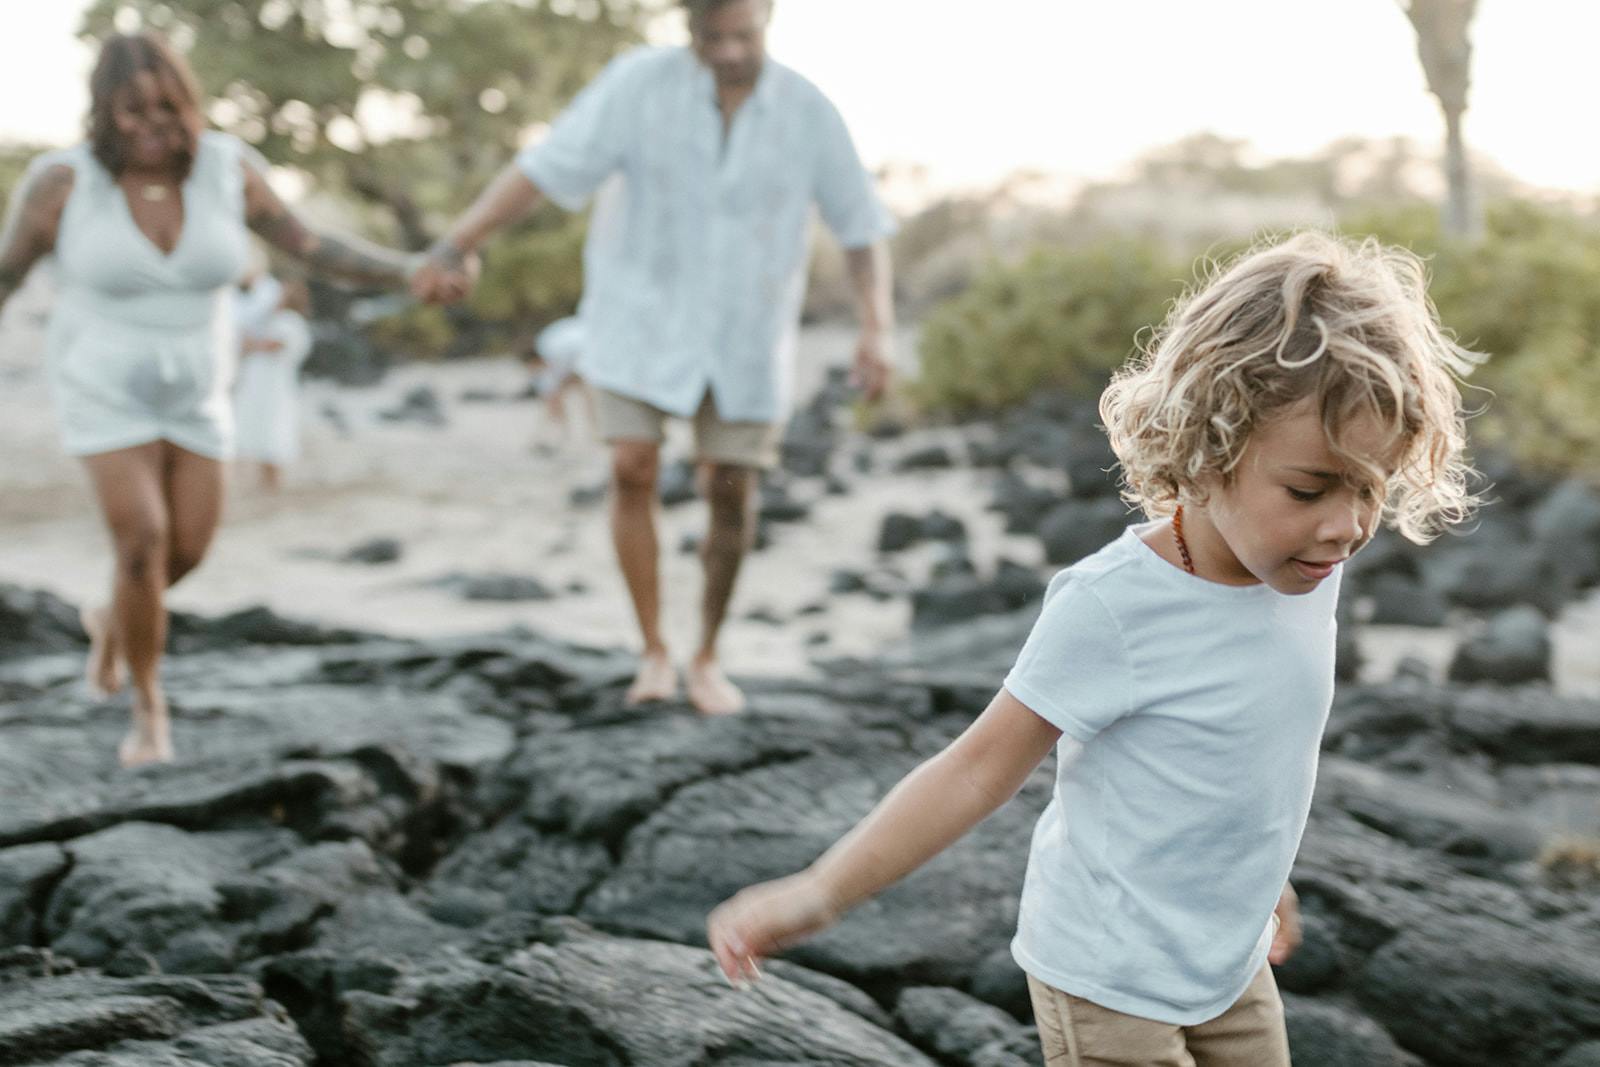 Hawaii adventure family photographer for capturing your family's adventurous side